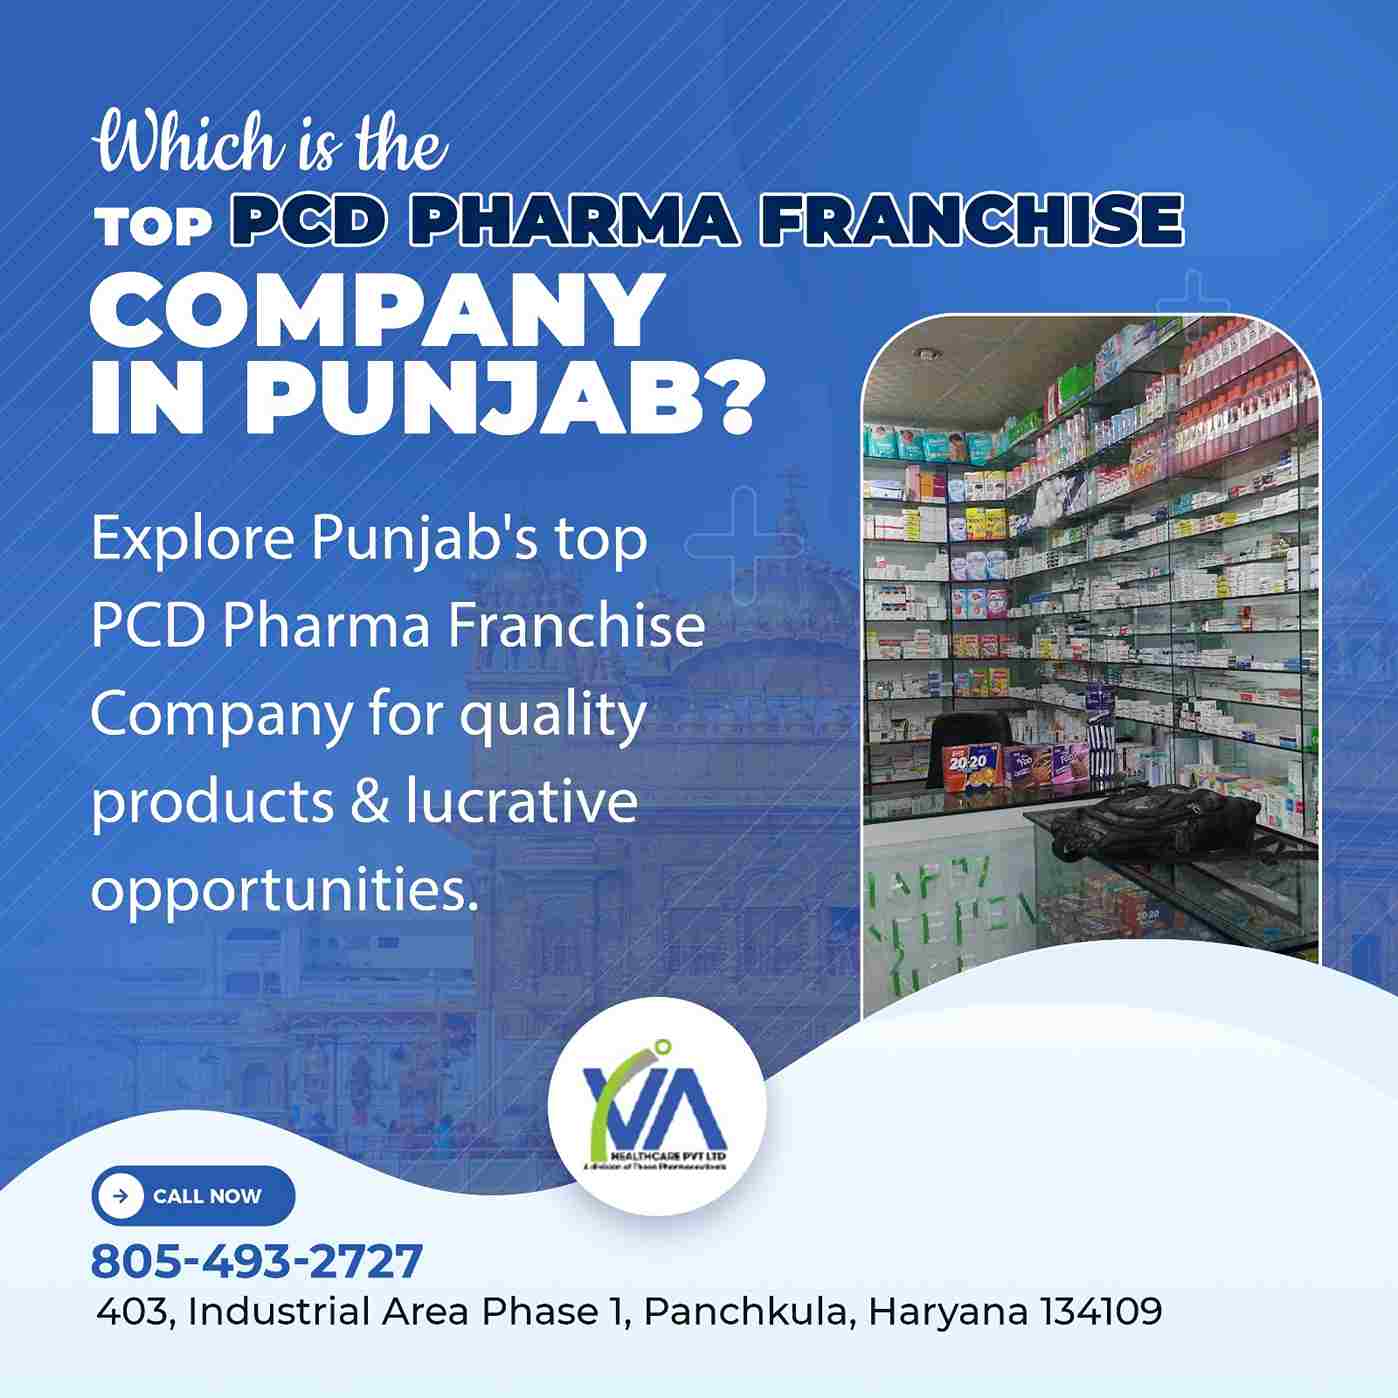 Which is the top PCD Pharma franchise Company in Punjab